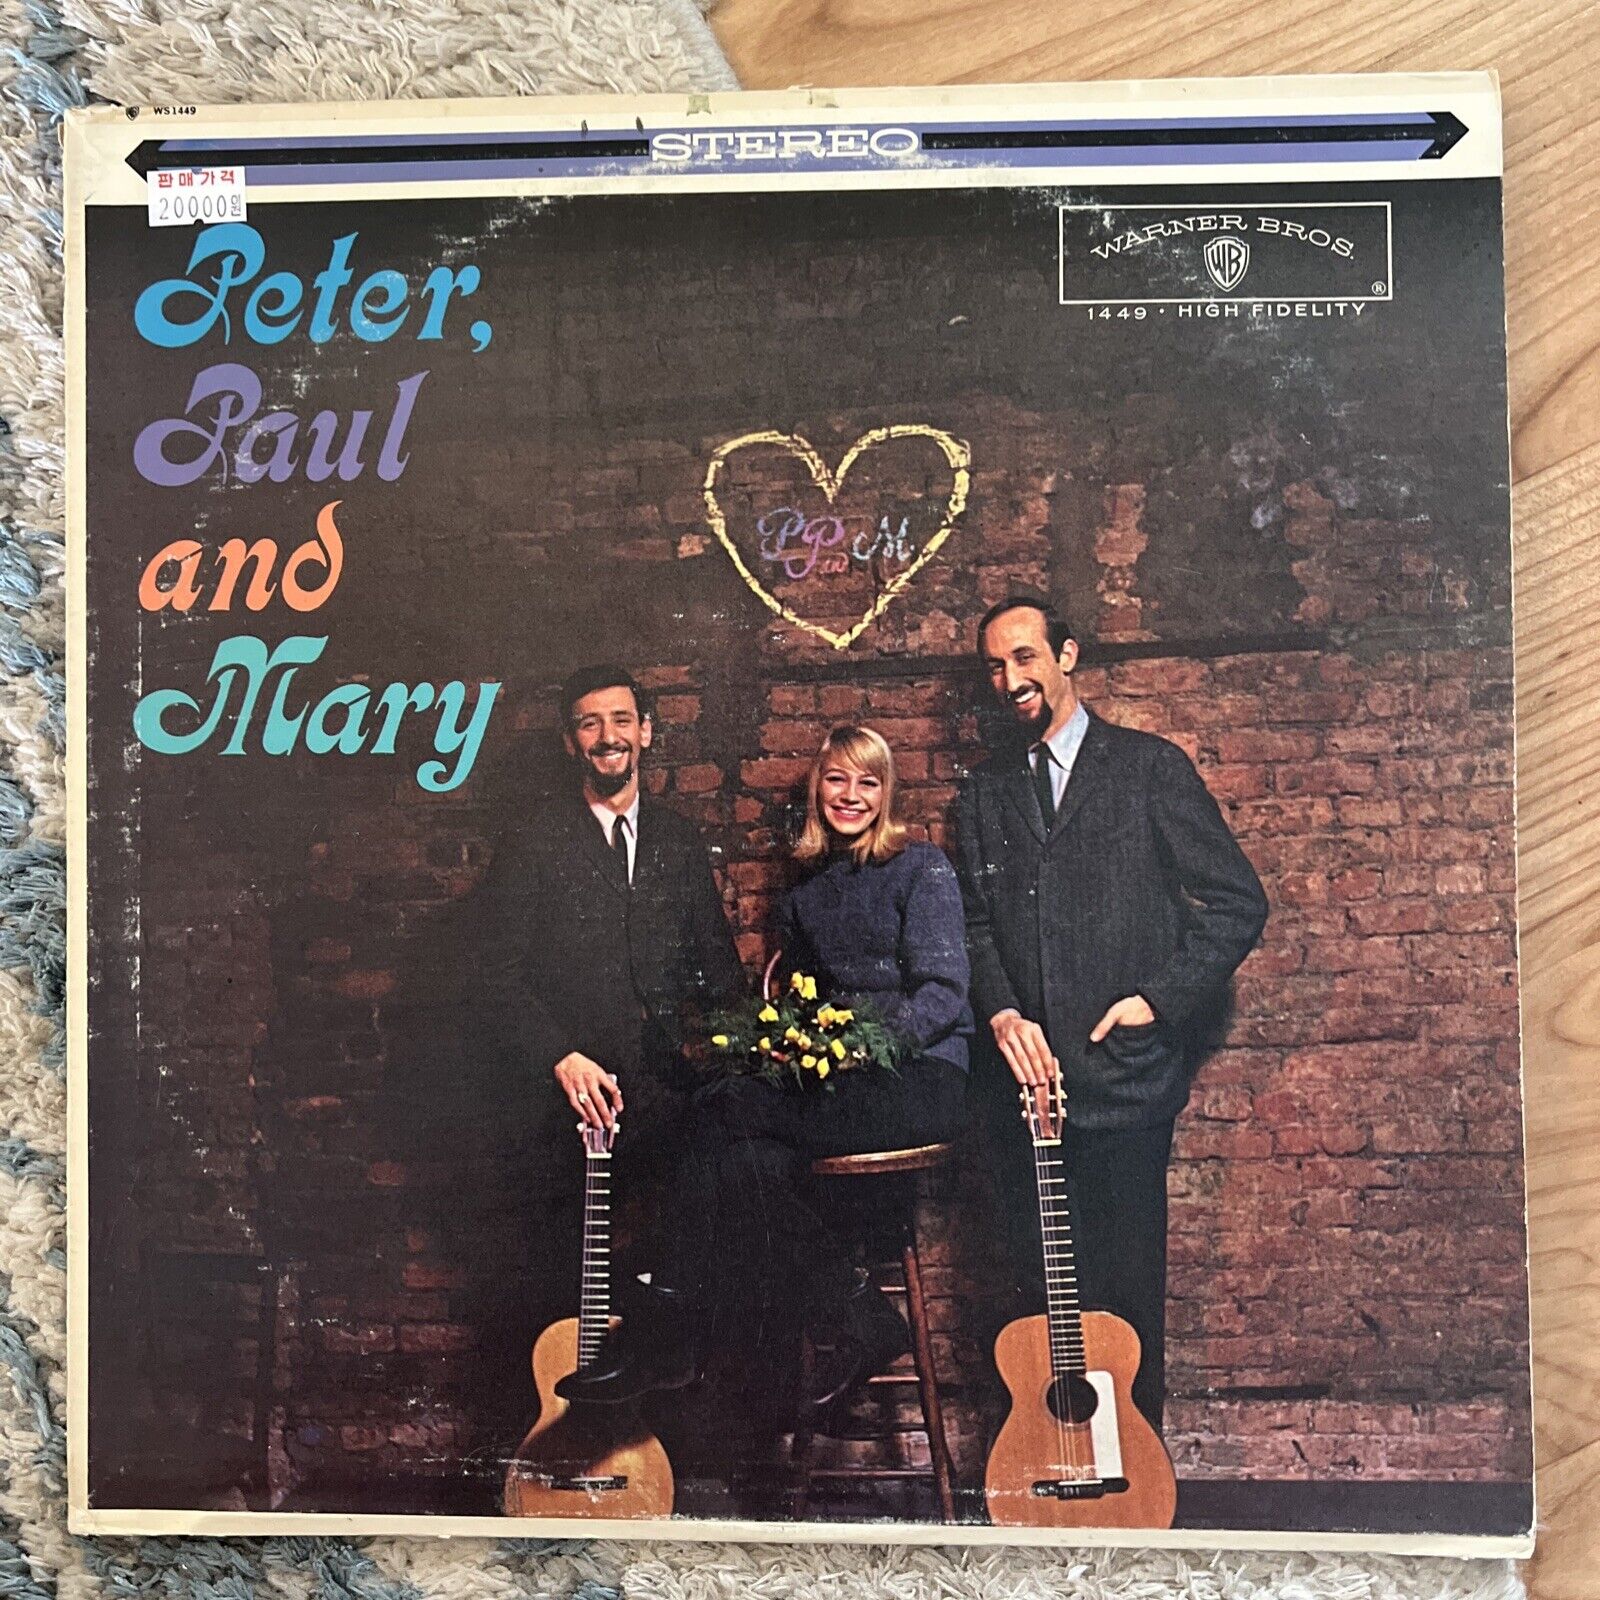 Peter, Paul And Mary - 1962 - Warner Bros. Records – WS 1449 - Vinyl LP